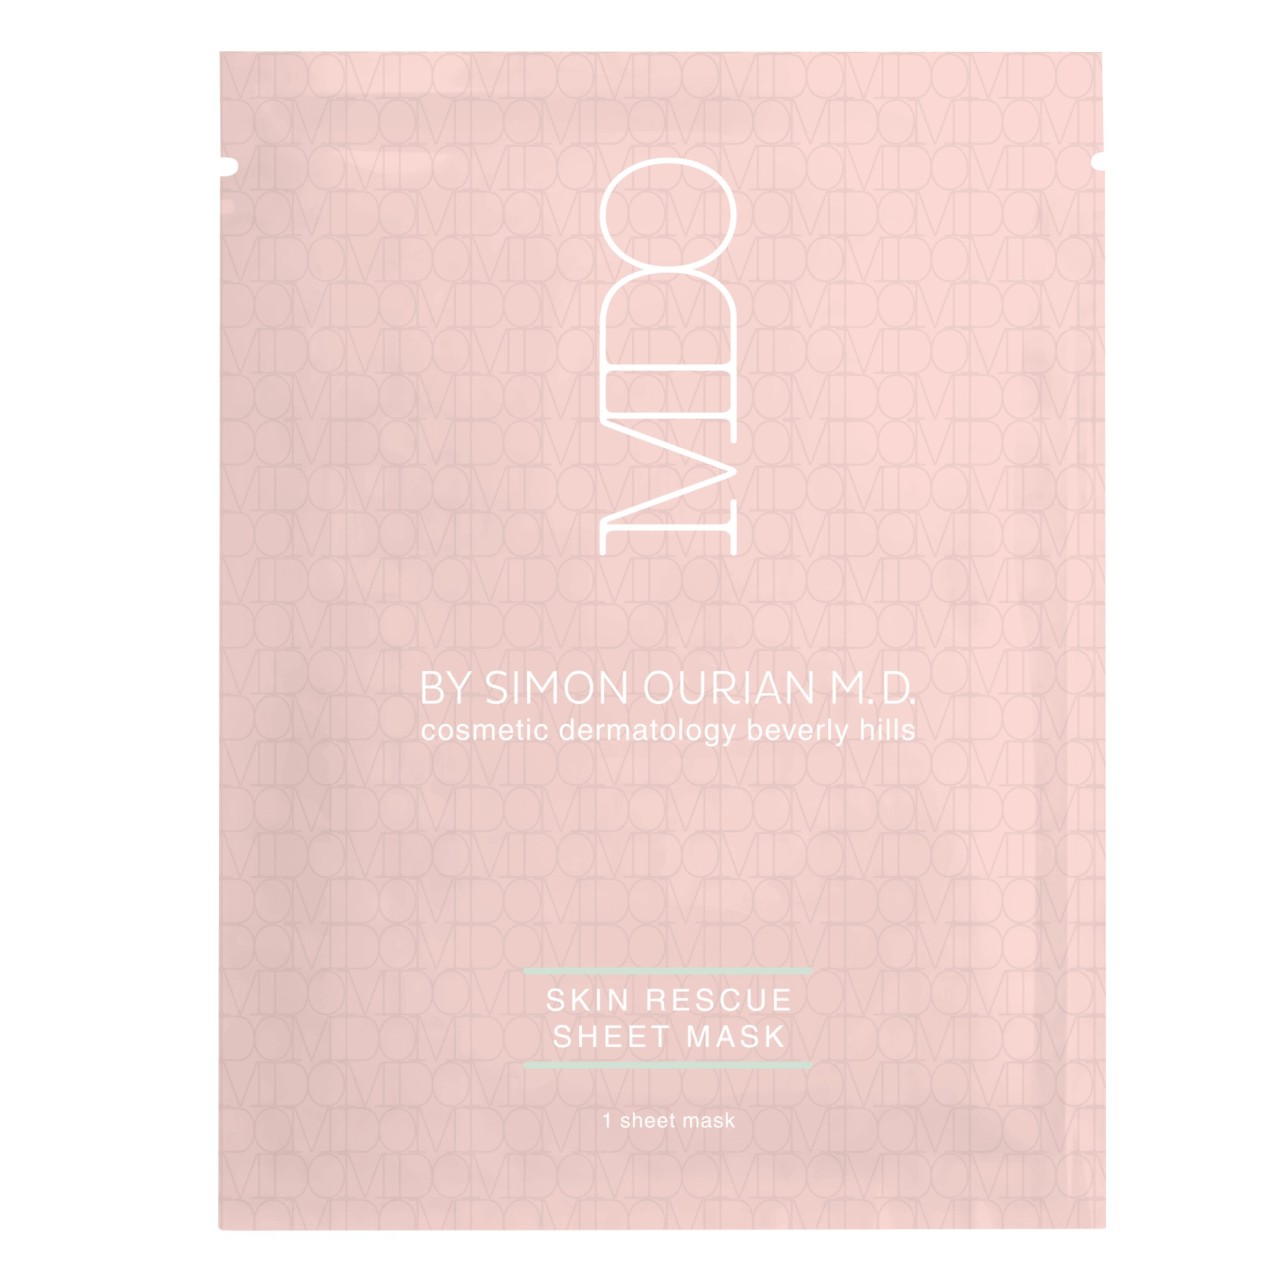 MDO by Simon Ourian M.D. Skin Rescue Mask